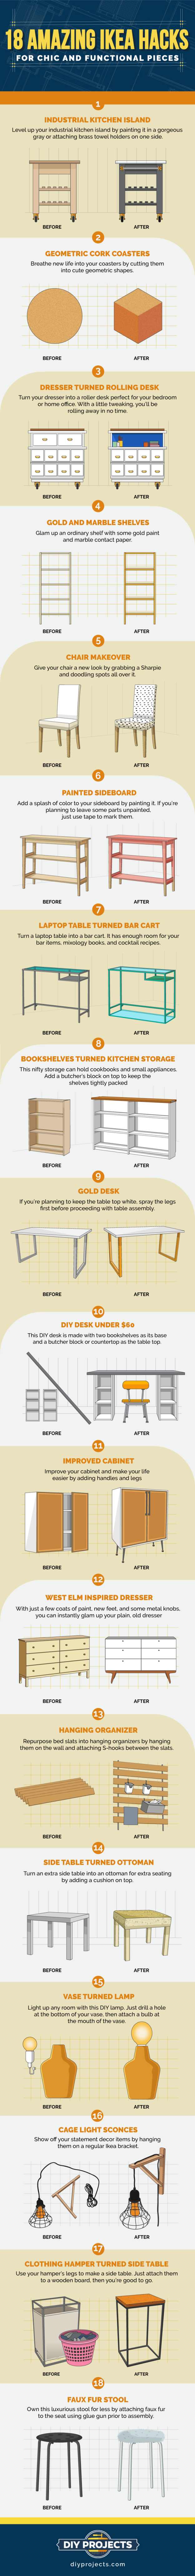 Amazing IKEA Hacks For Chic And Functional Pieces | infographic | ikea hack desk countertop